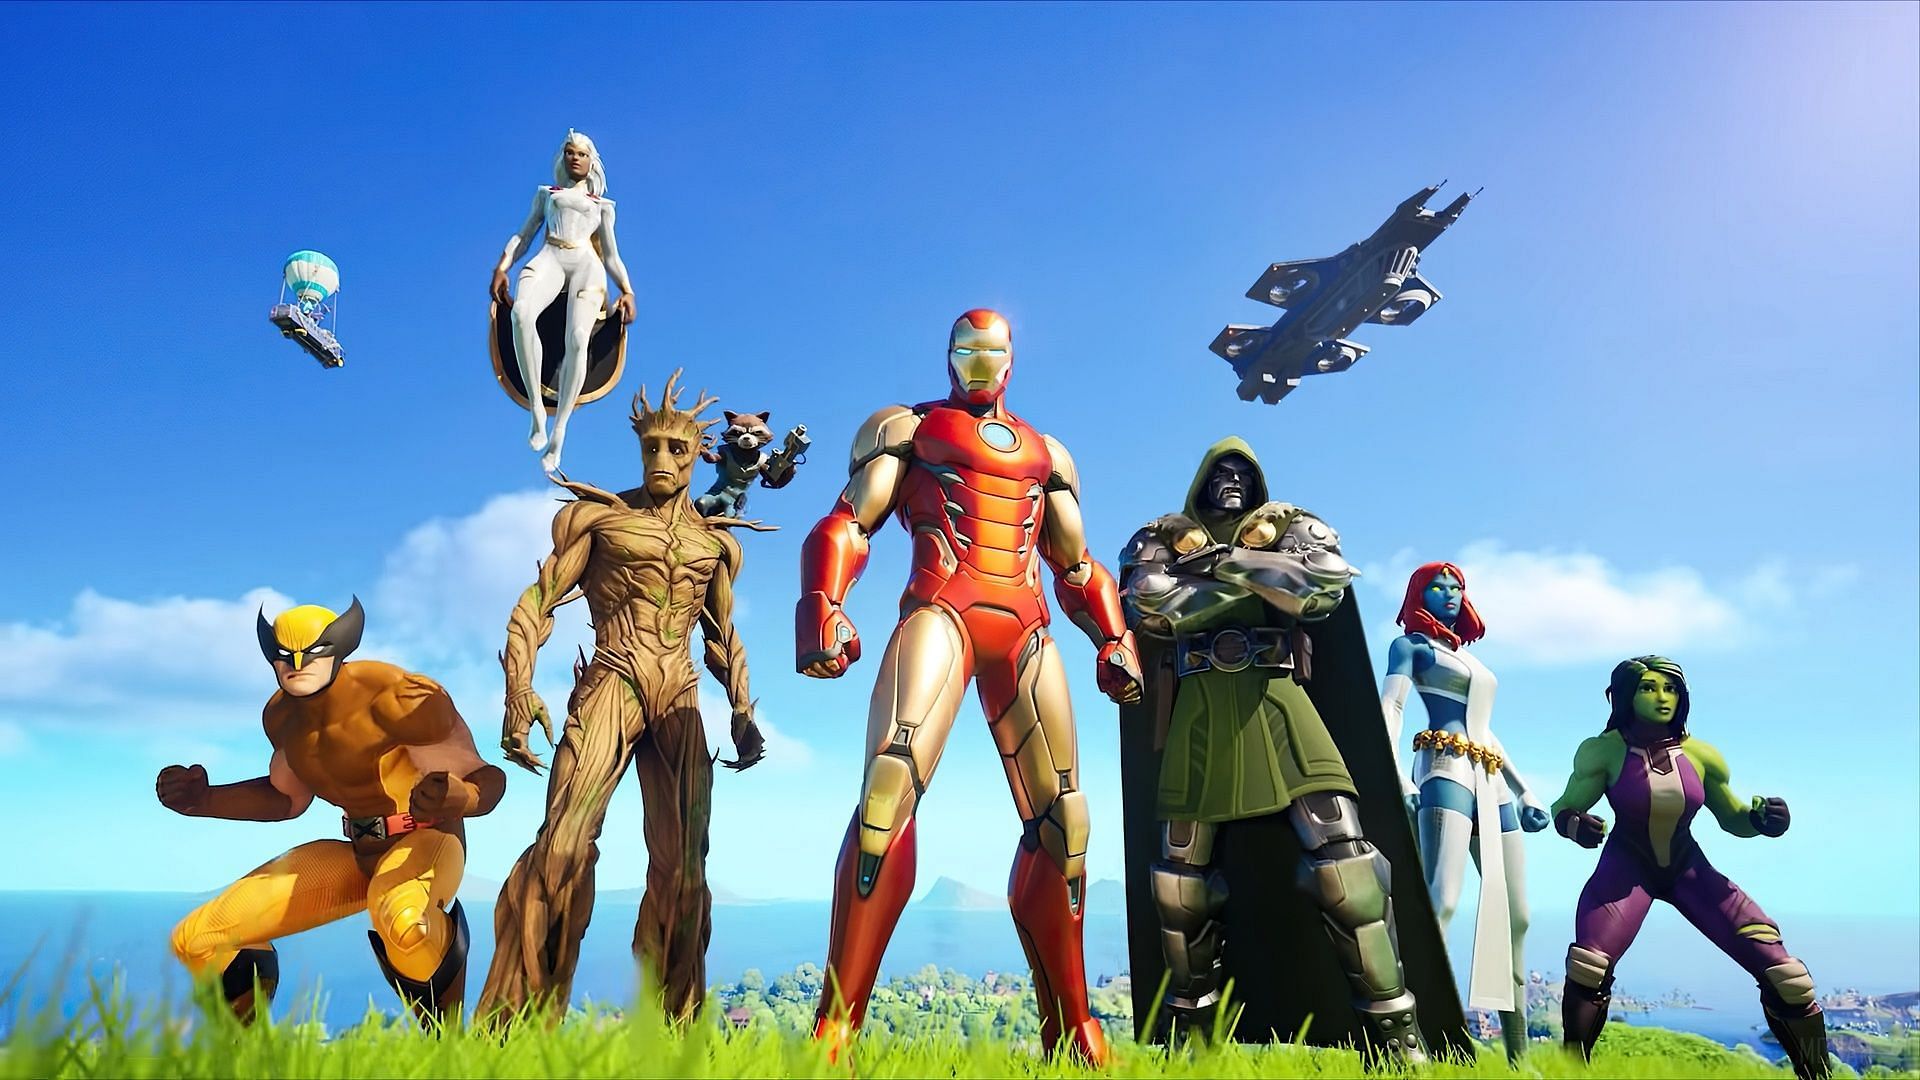 Fortnite&#039;s Tier 100 skins haven&#039;t been very original for the past few seasons (Image via Epic Games)